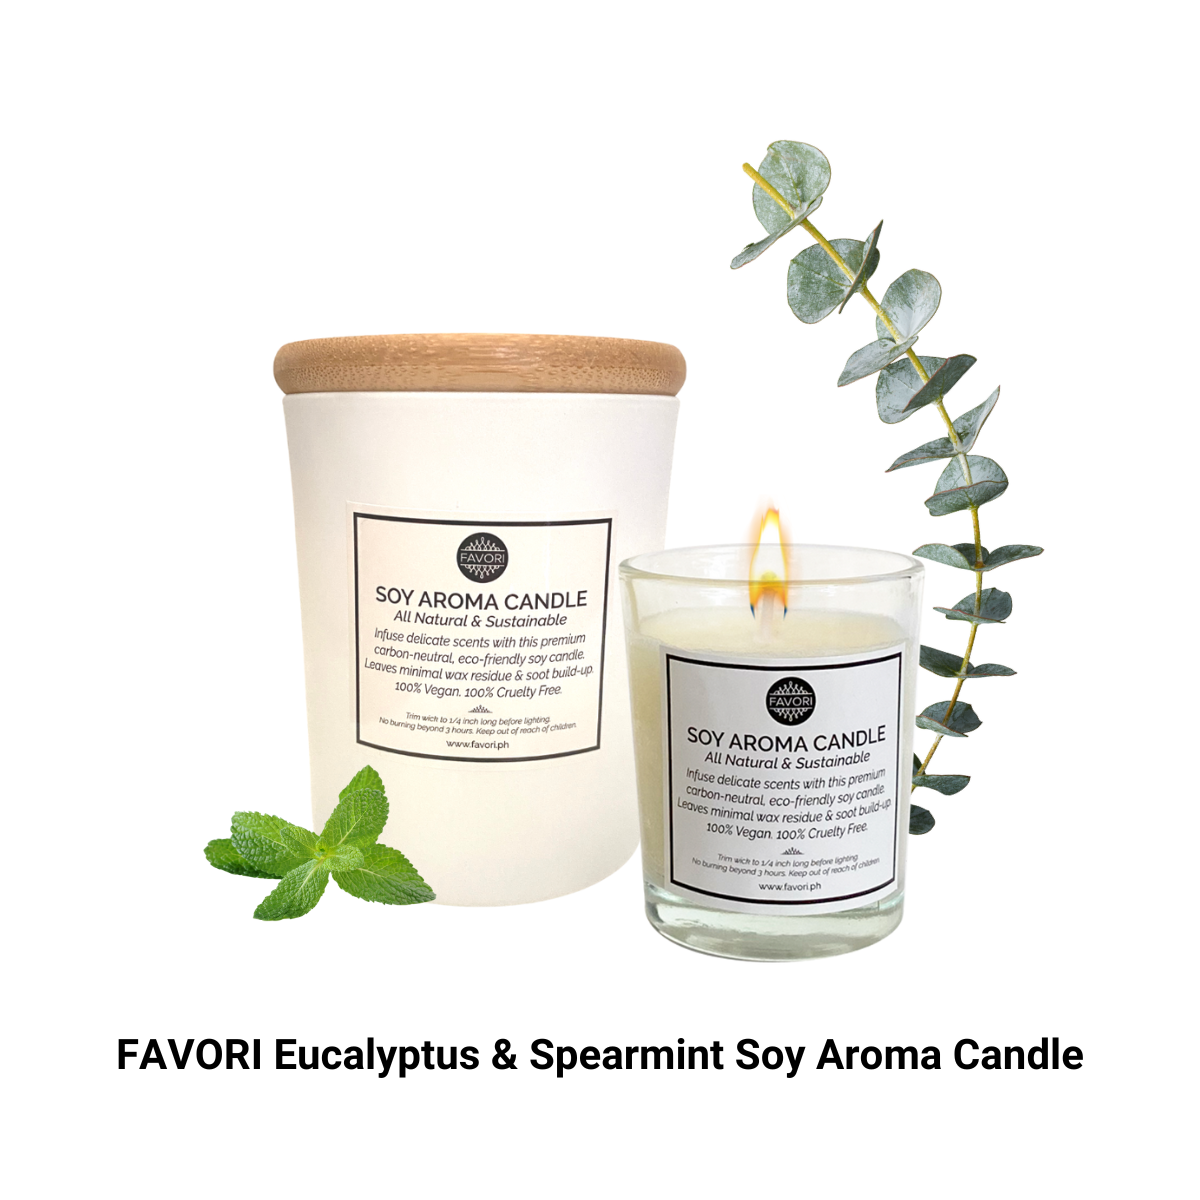 A FAVORI Scents Eucalyptus & Spearmint Soy Aroma Candle (SAC) with a sprig of eucalyptus and mint leaves against a white background, favoring oil infusions for an enhanced scent.